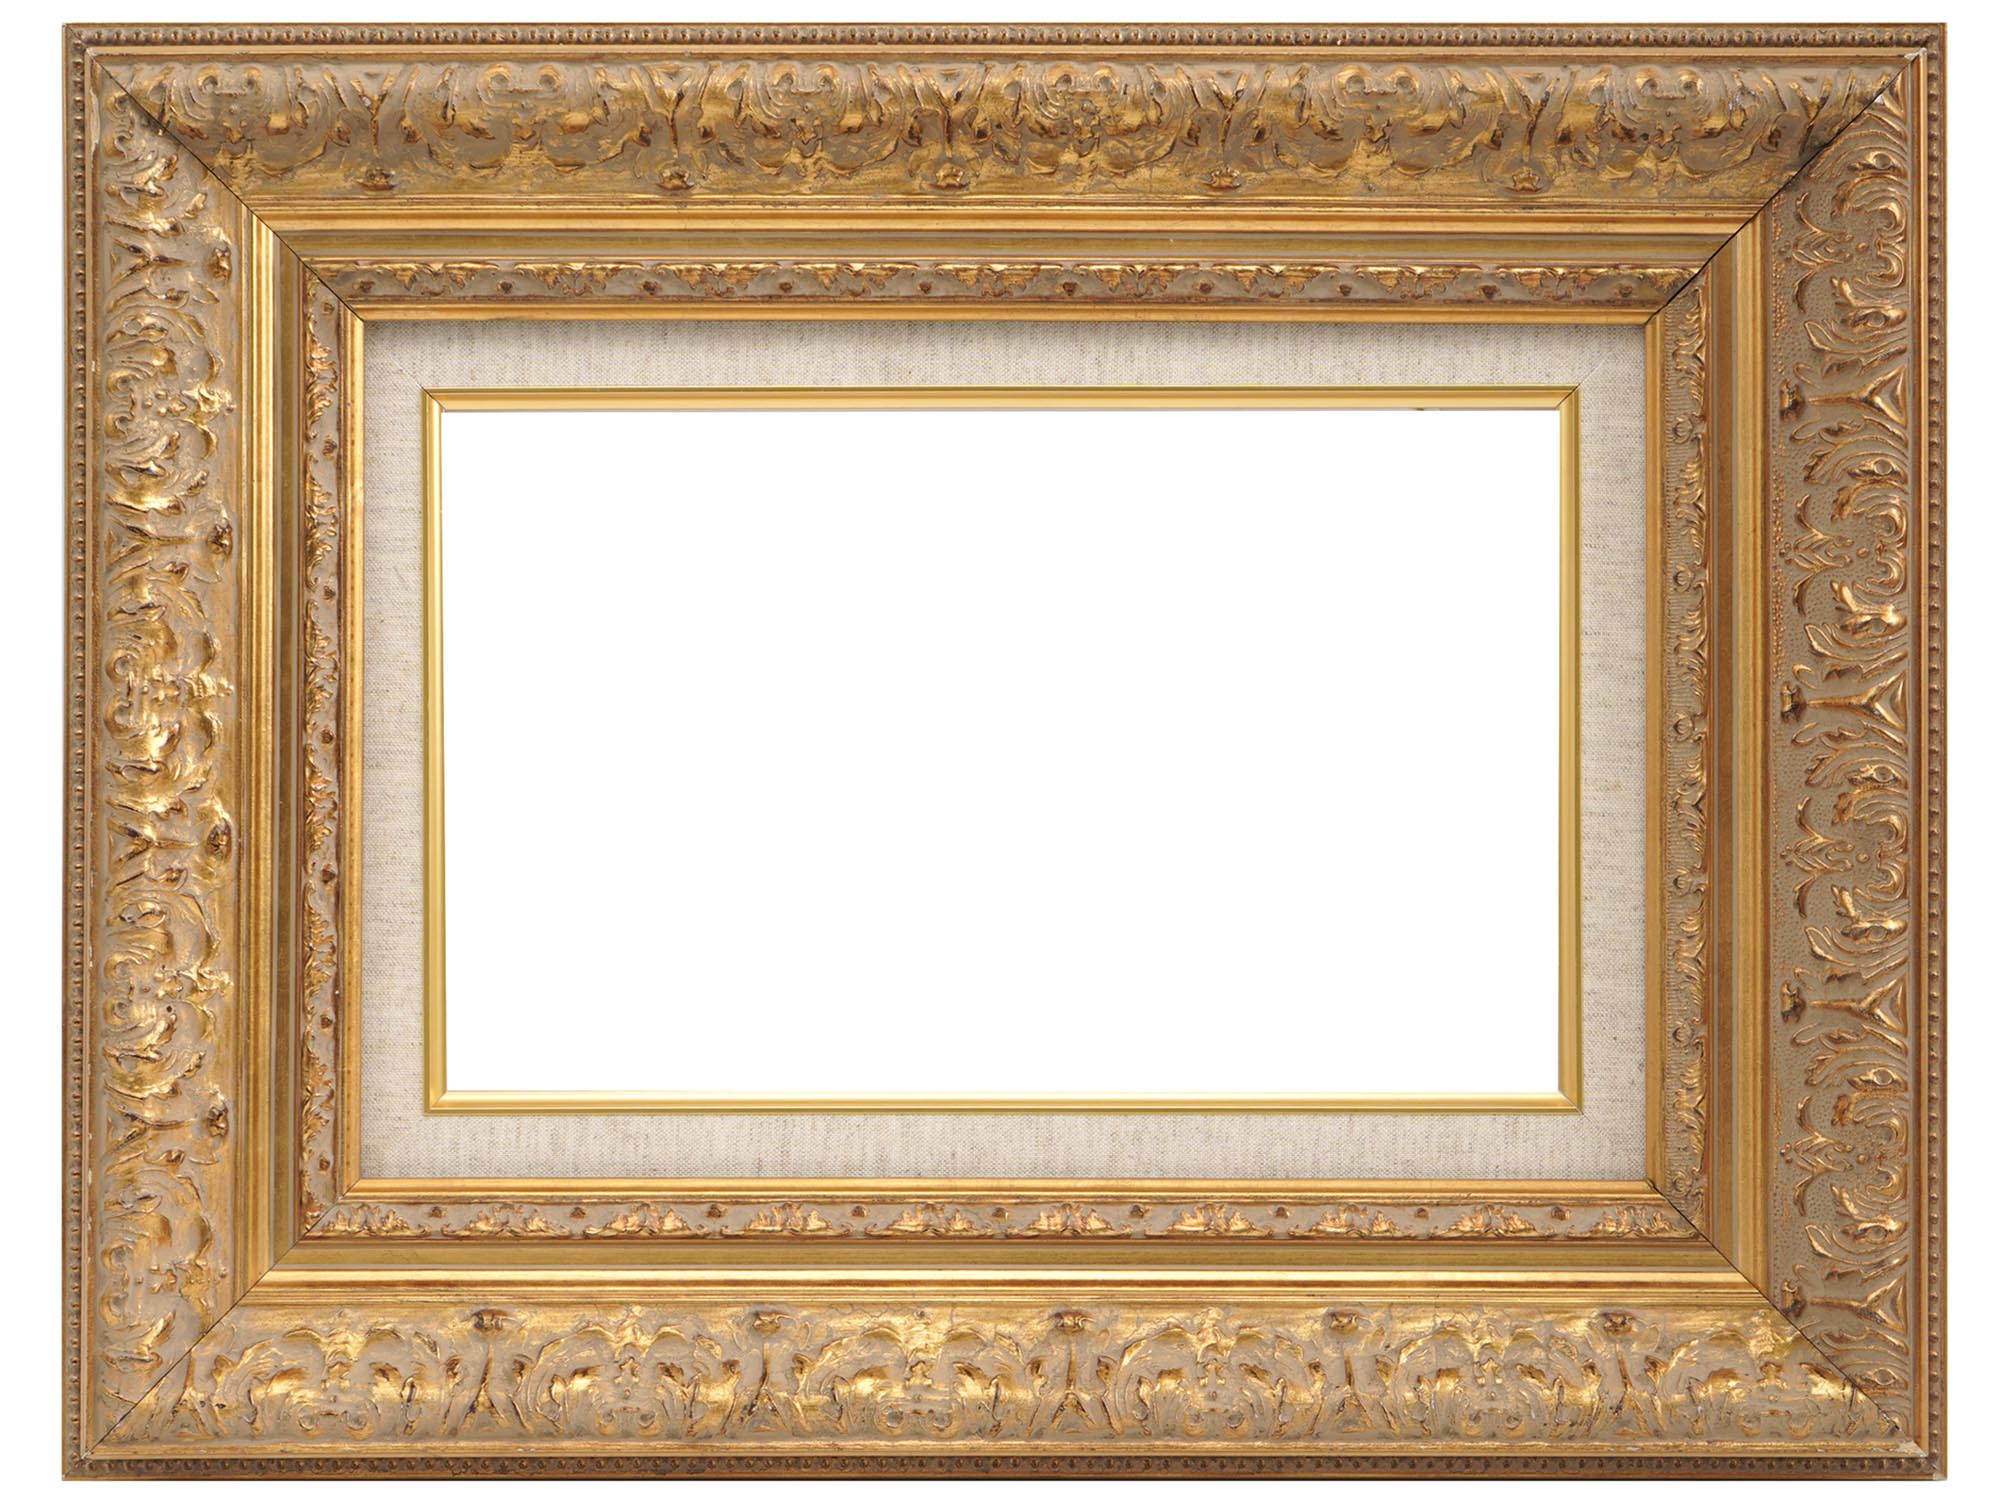 CLASSIC ANTIQUE AND VINTAGE WOODEN PICTURE FRAMES PIC-1